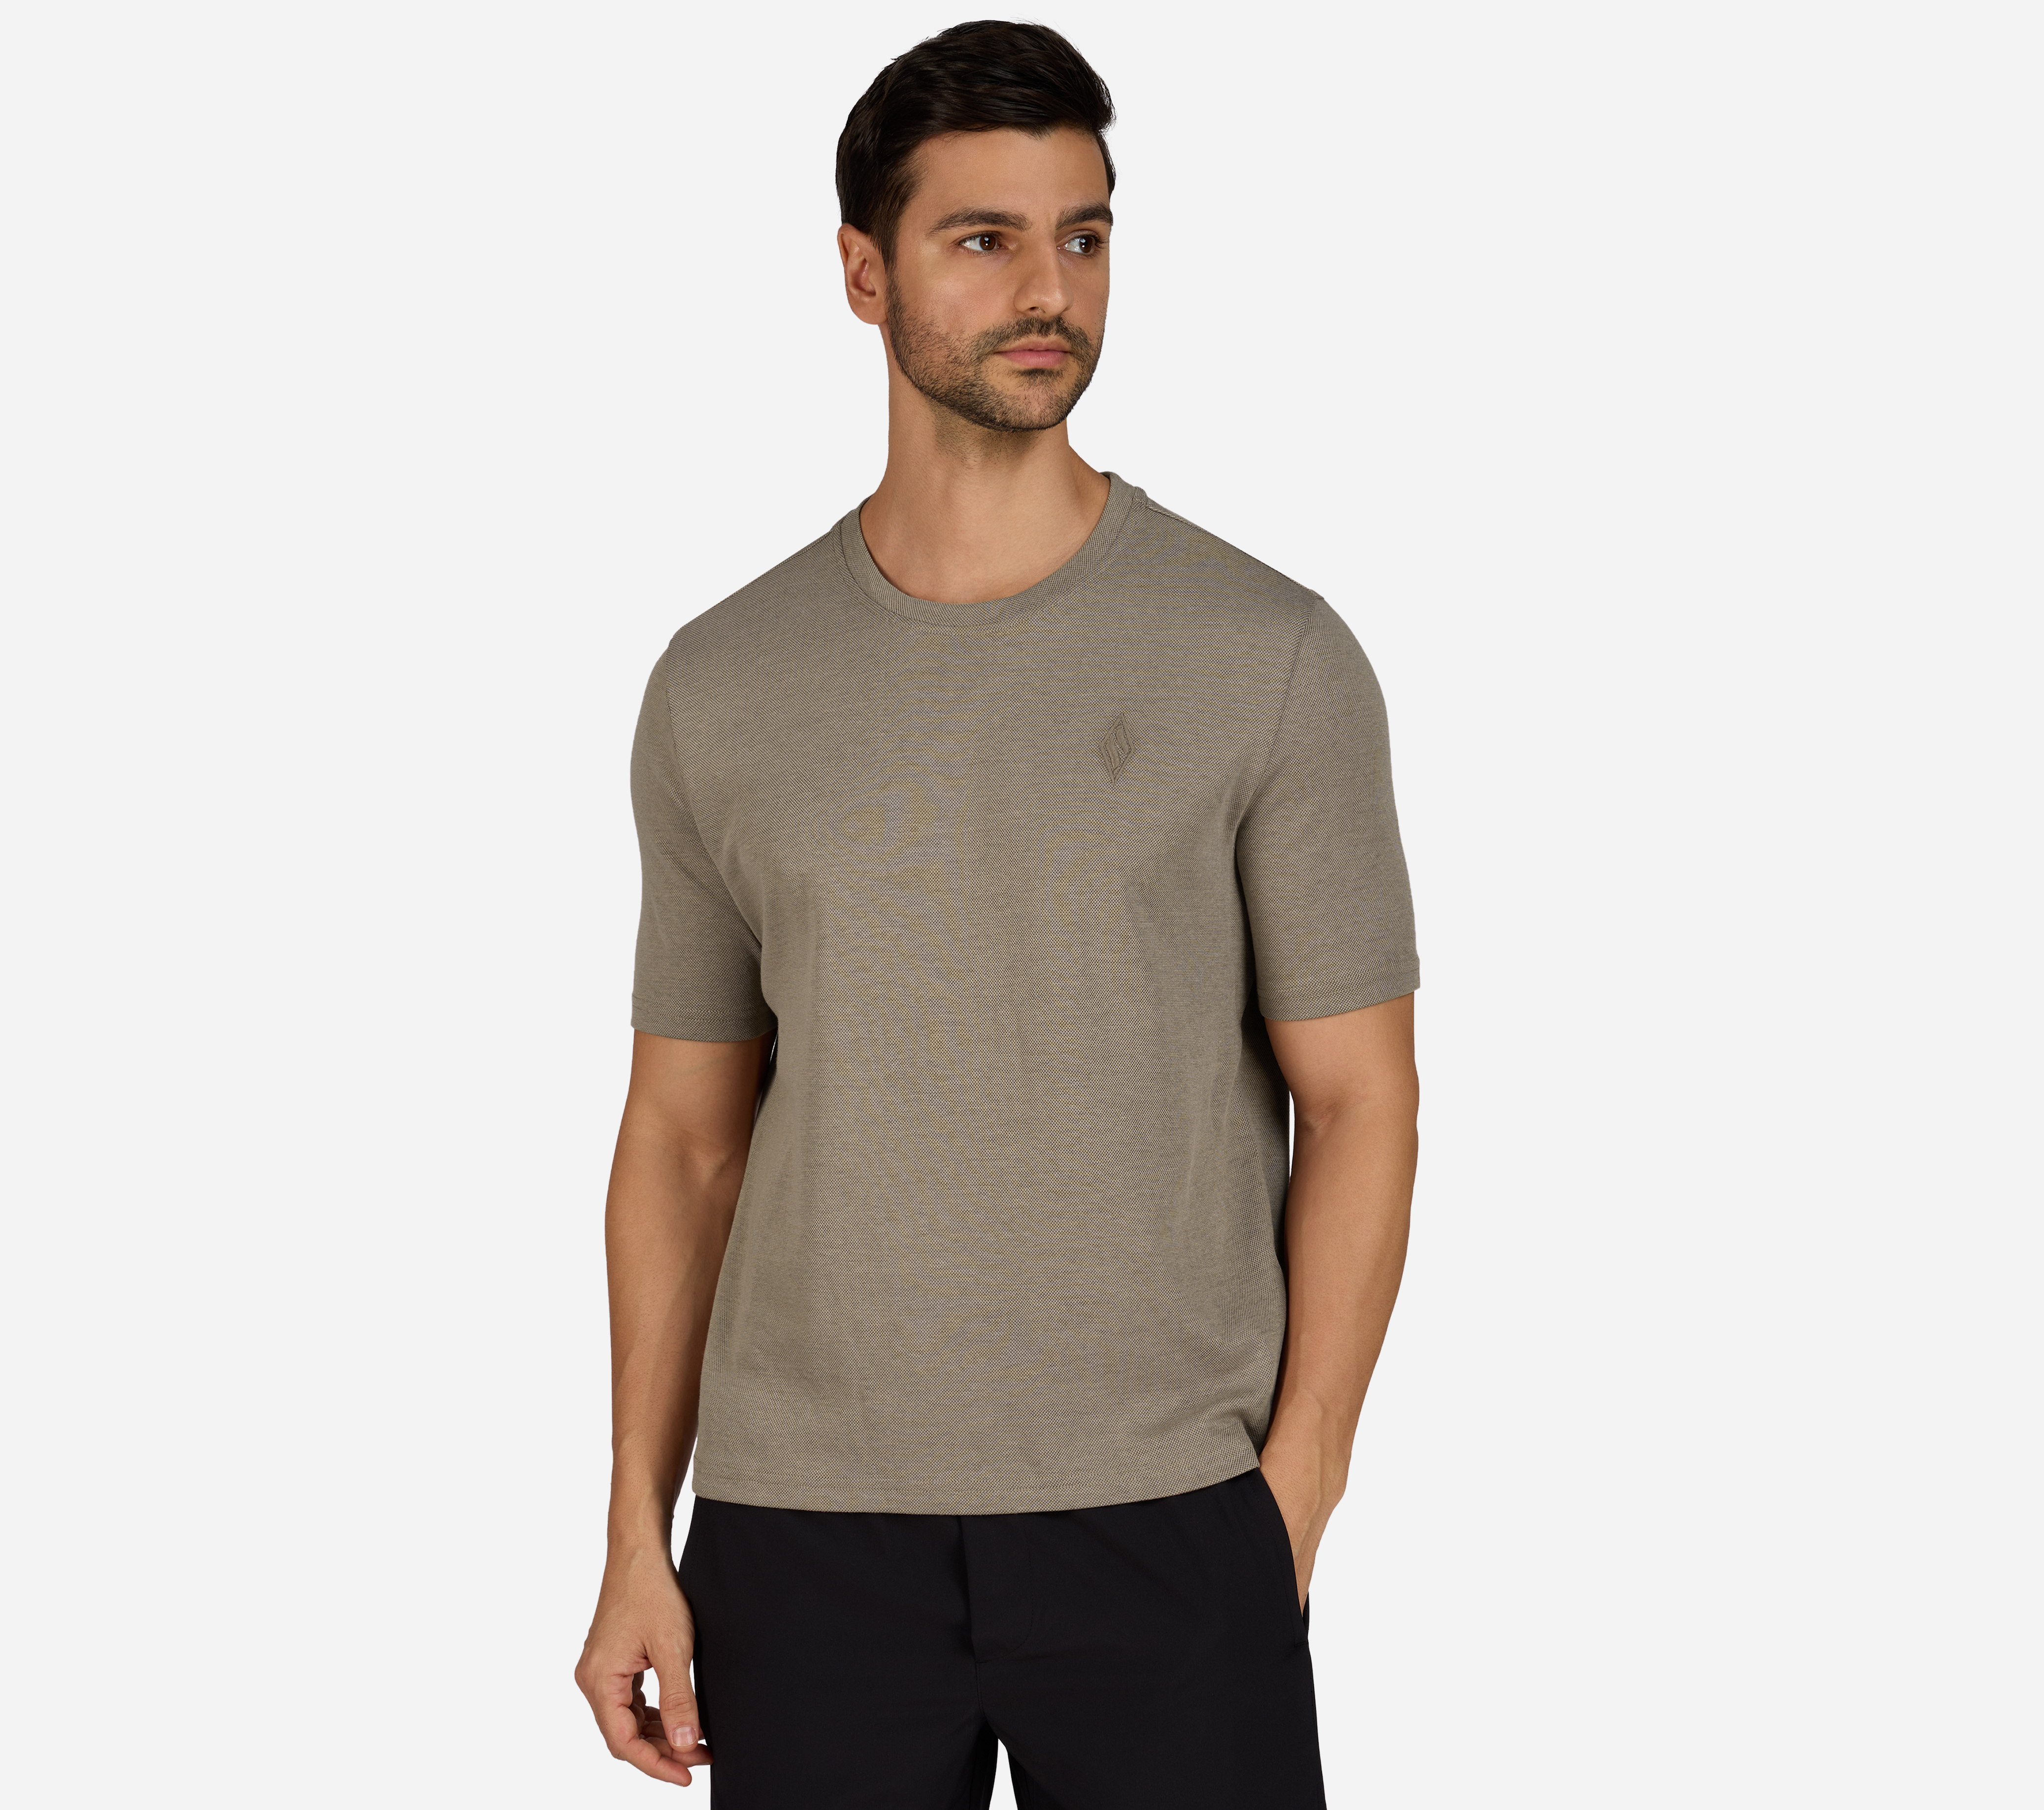 GOKNIT PIQUE SS TEE, BROWN/NATURAL Apparels Lateral View